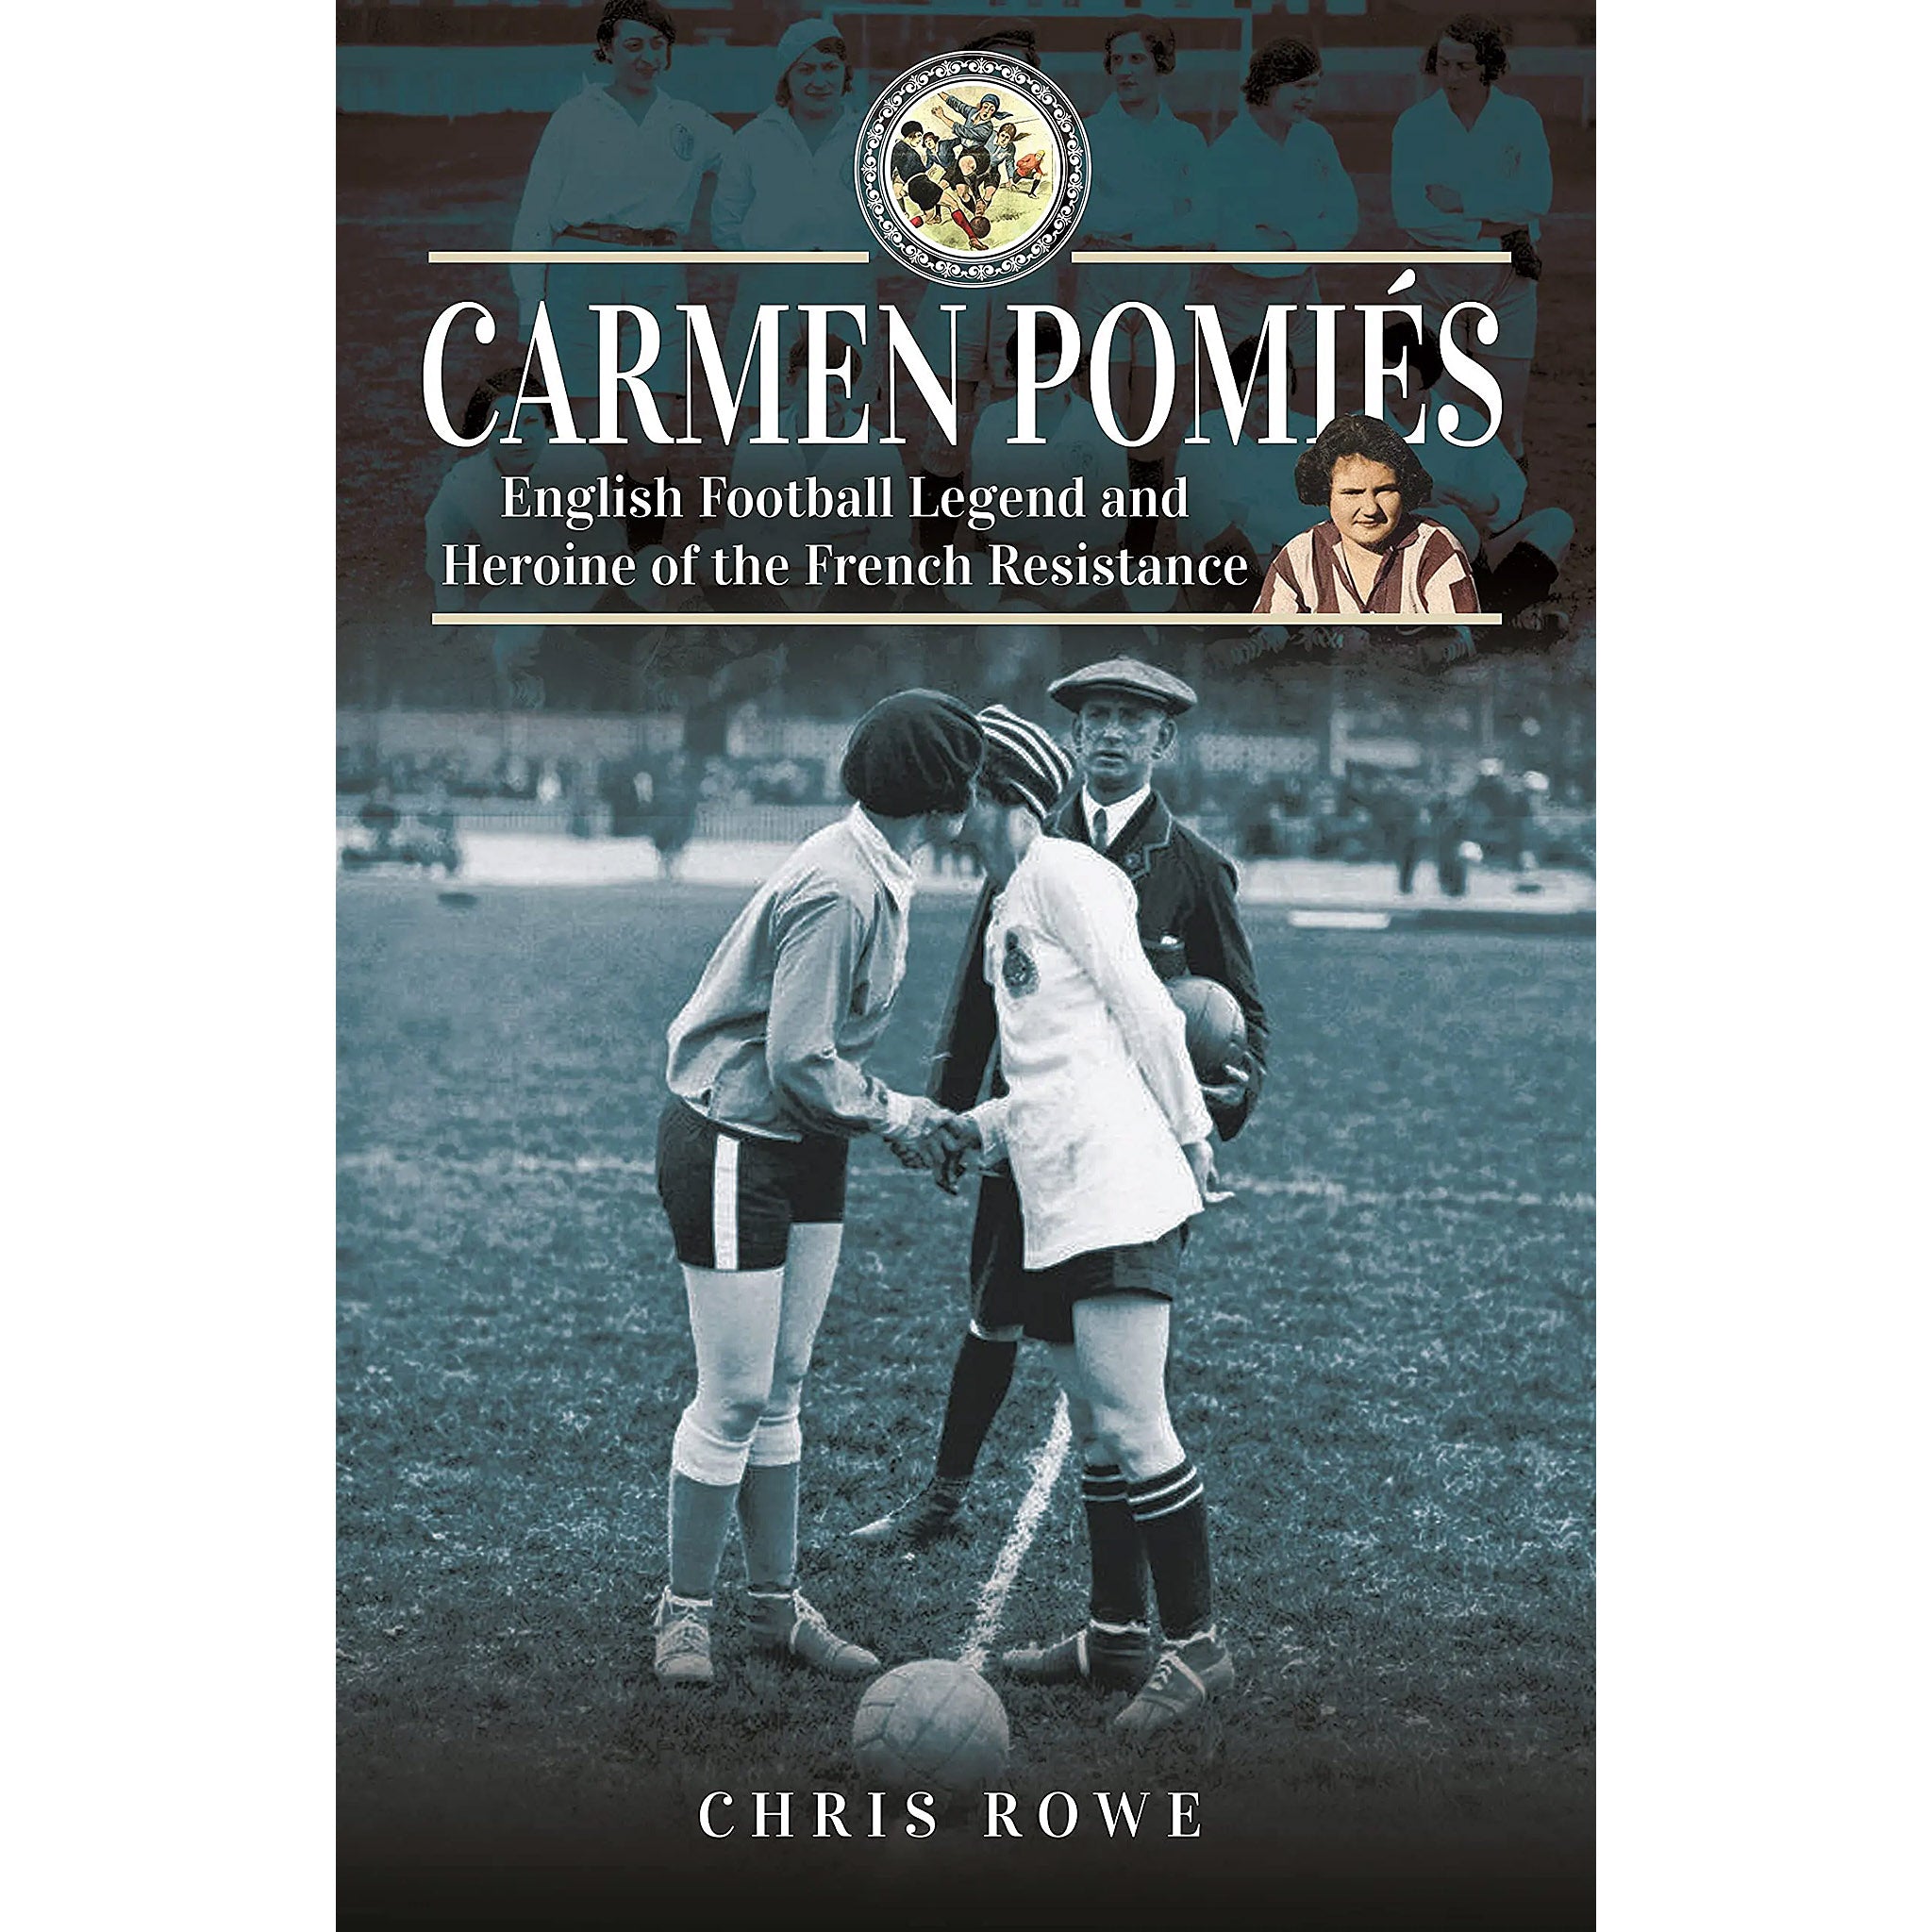 Carmen Pomies – Football Legend and Heroine of the French Resistance